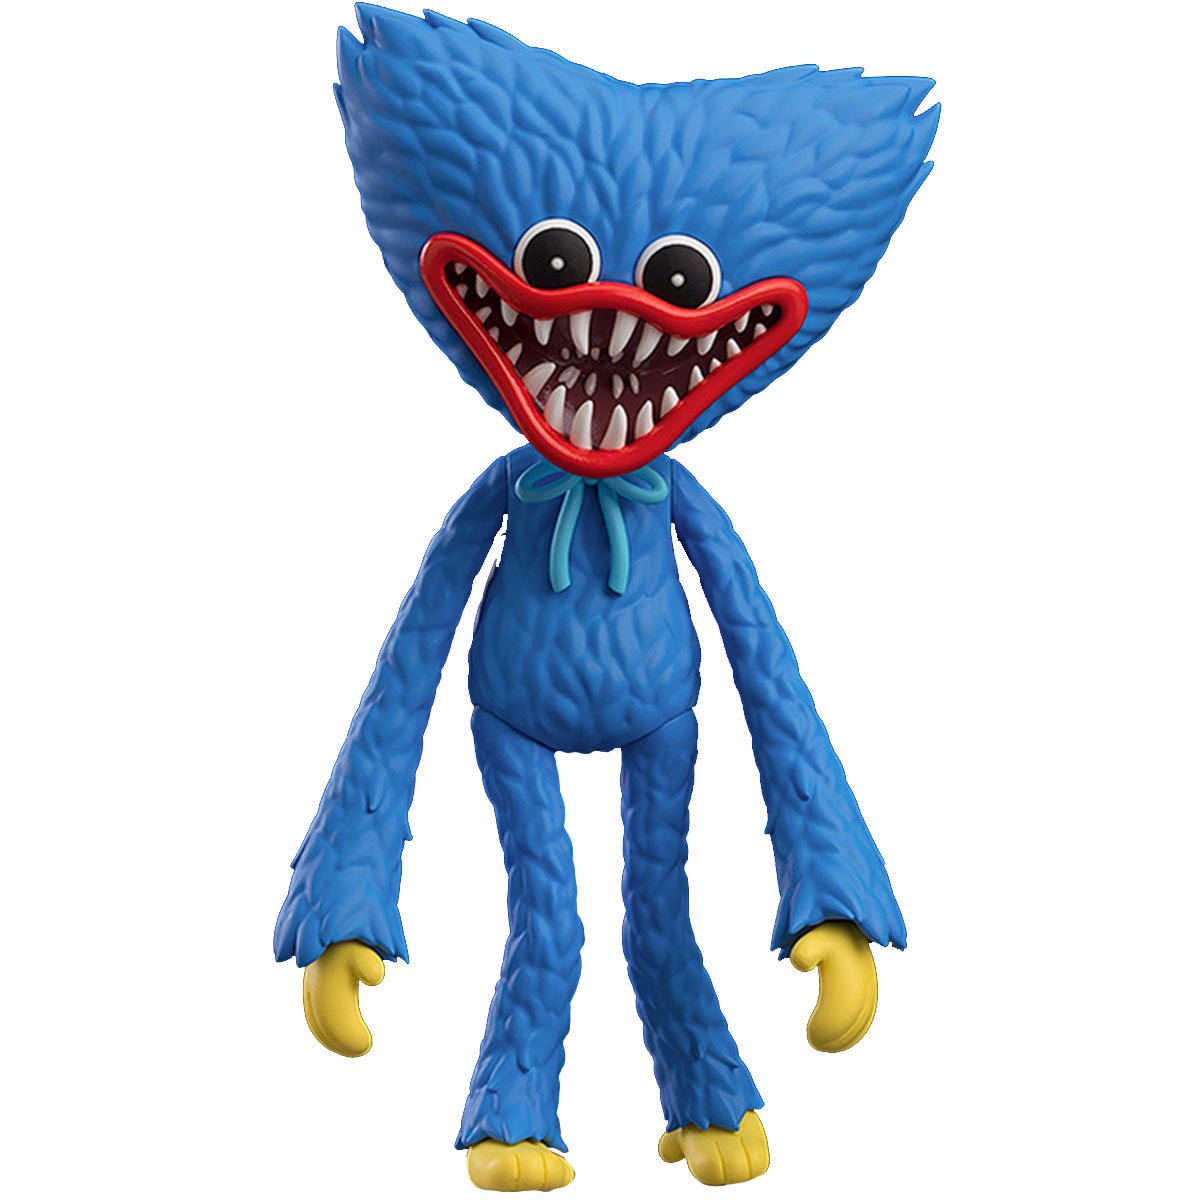  Poppy Playtime - Smiling Huggy Wuggy Action Figure (5